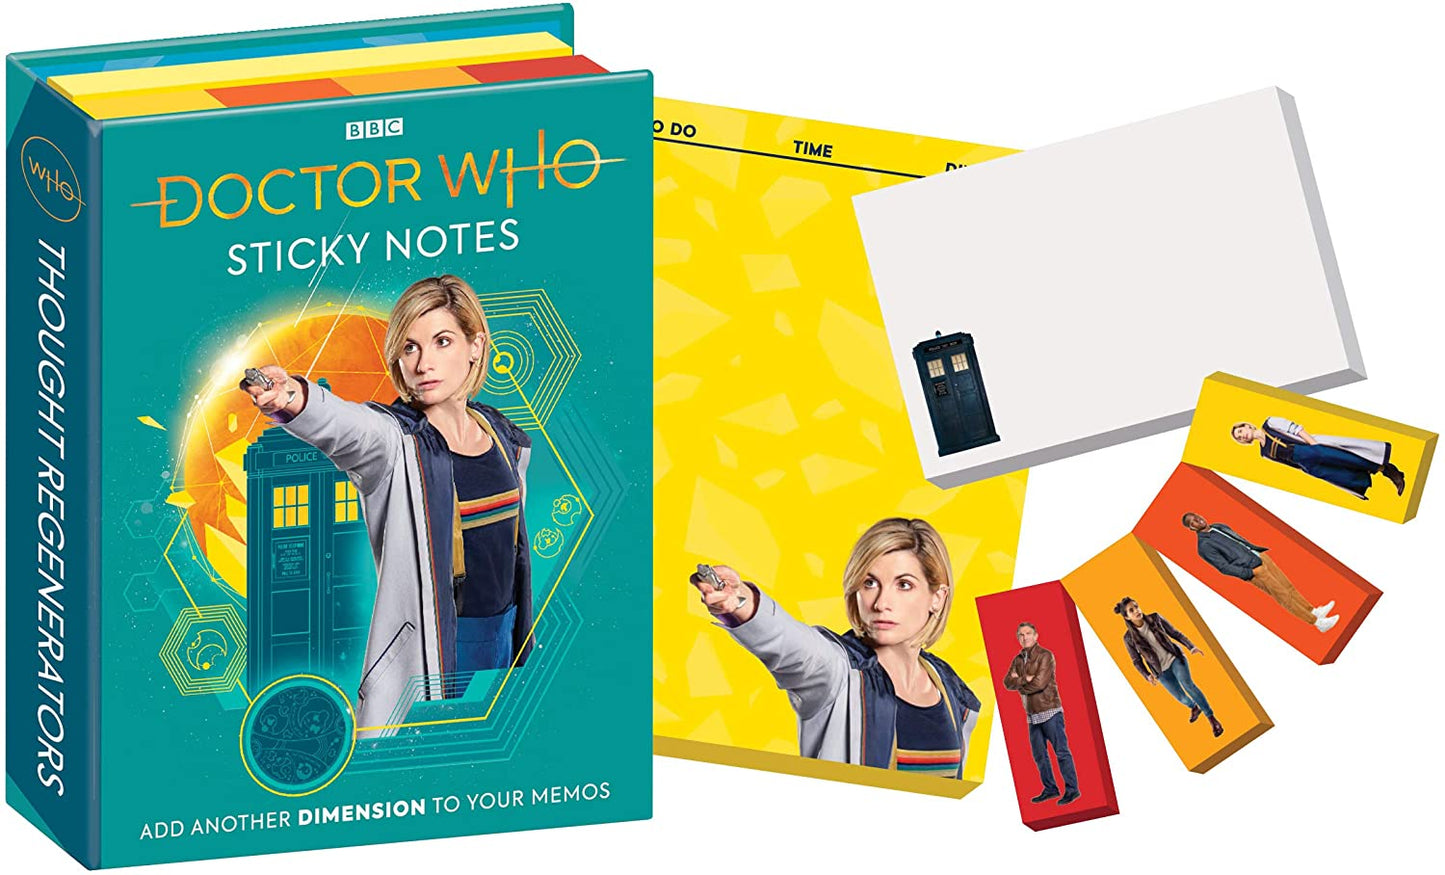 Doctor Who 13th Dr. Sticky Notes Booklet